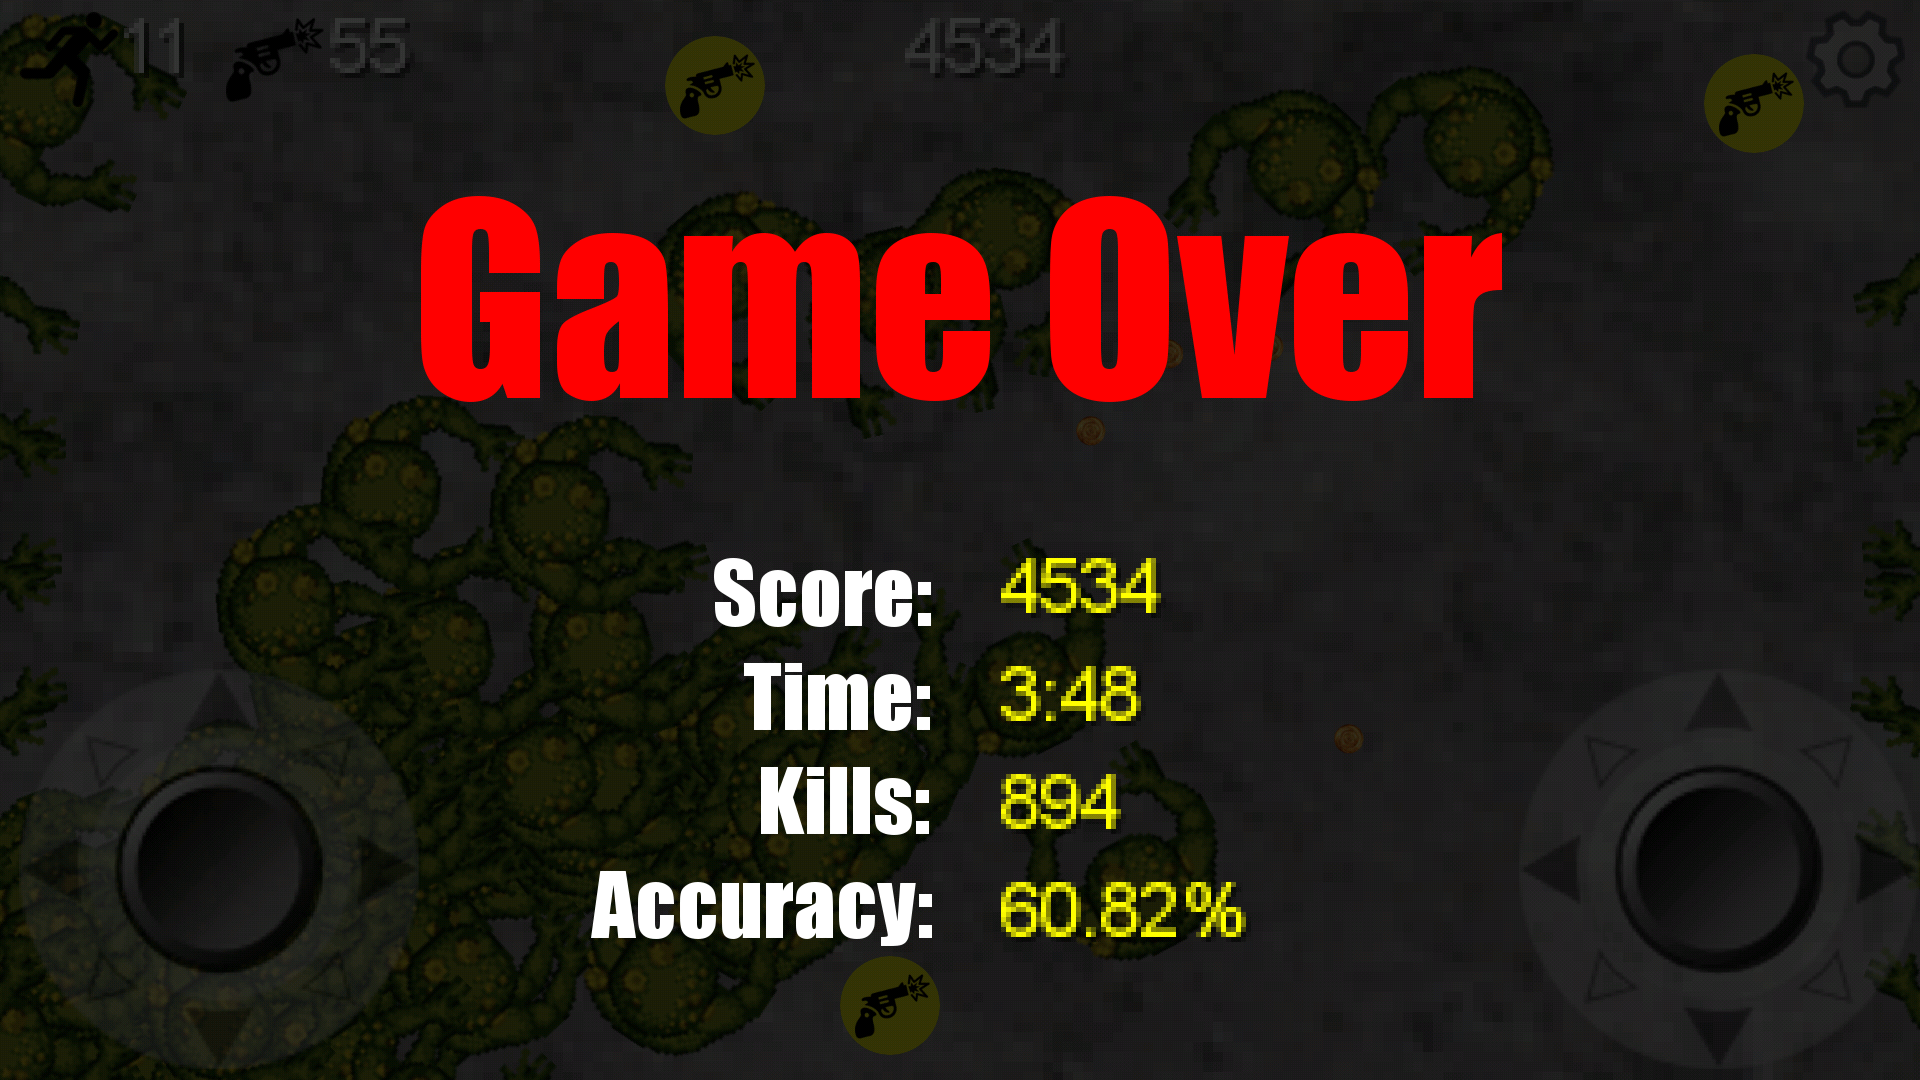 One Life to Survive - game over screen showing score, time played, kills, and shooting accuracy